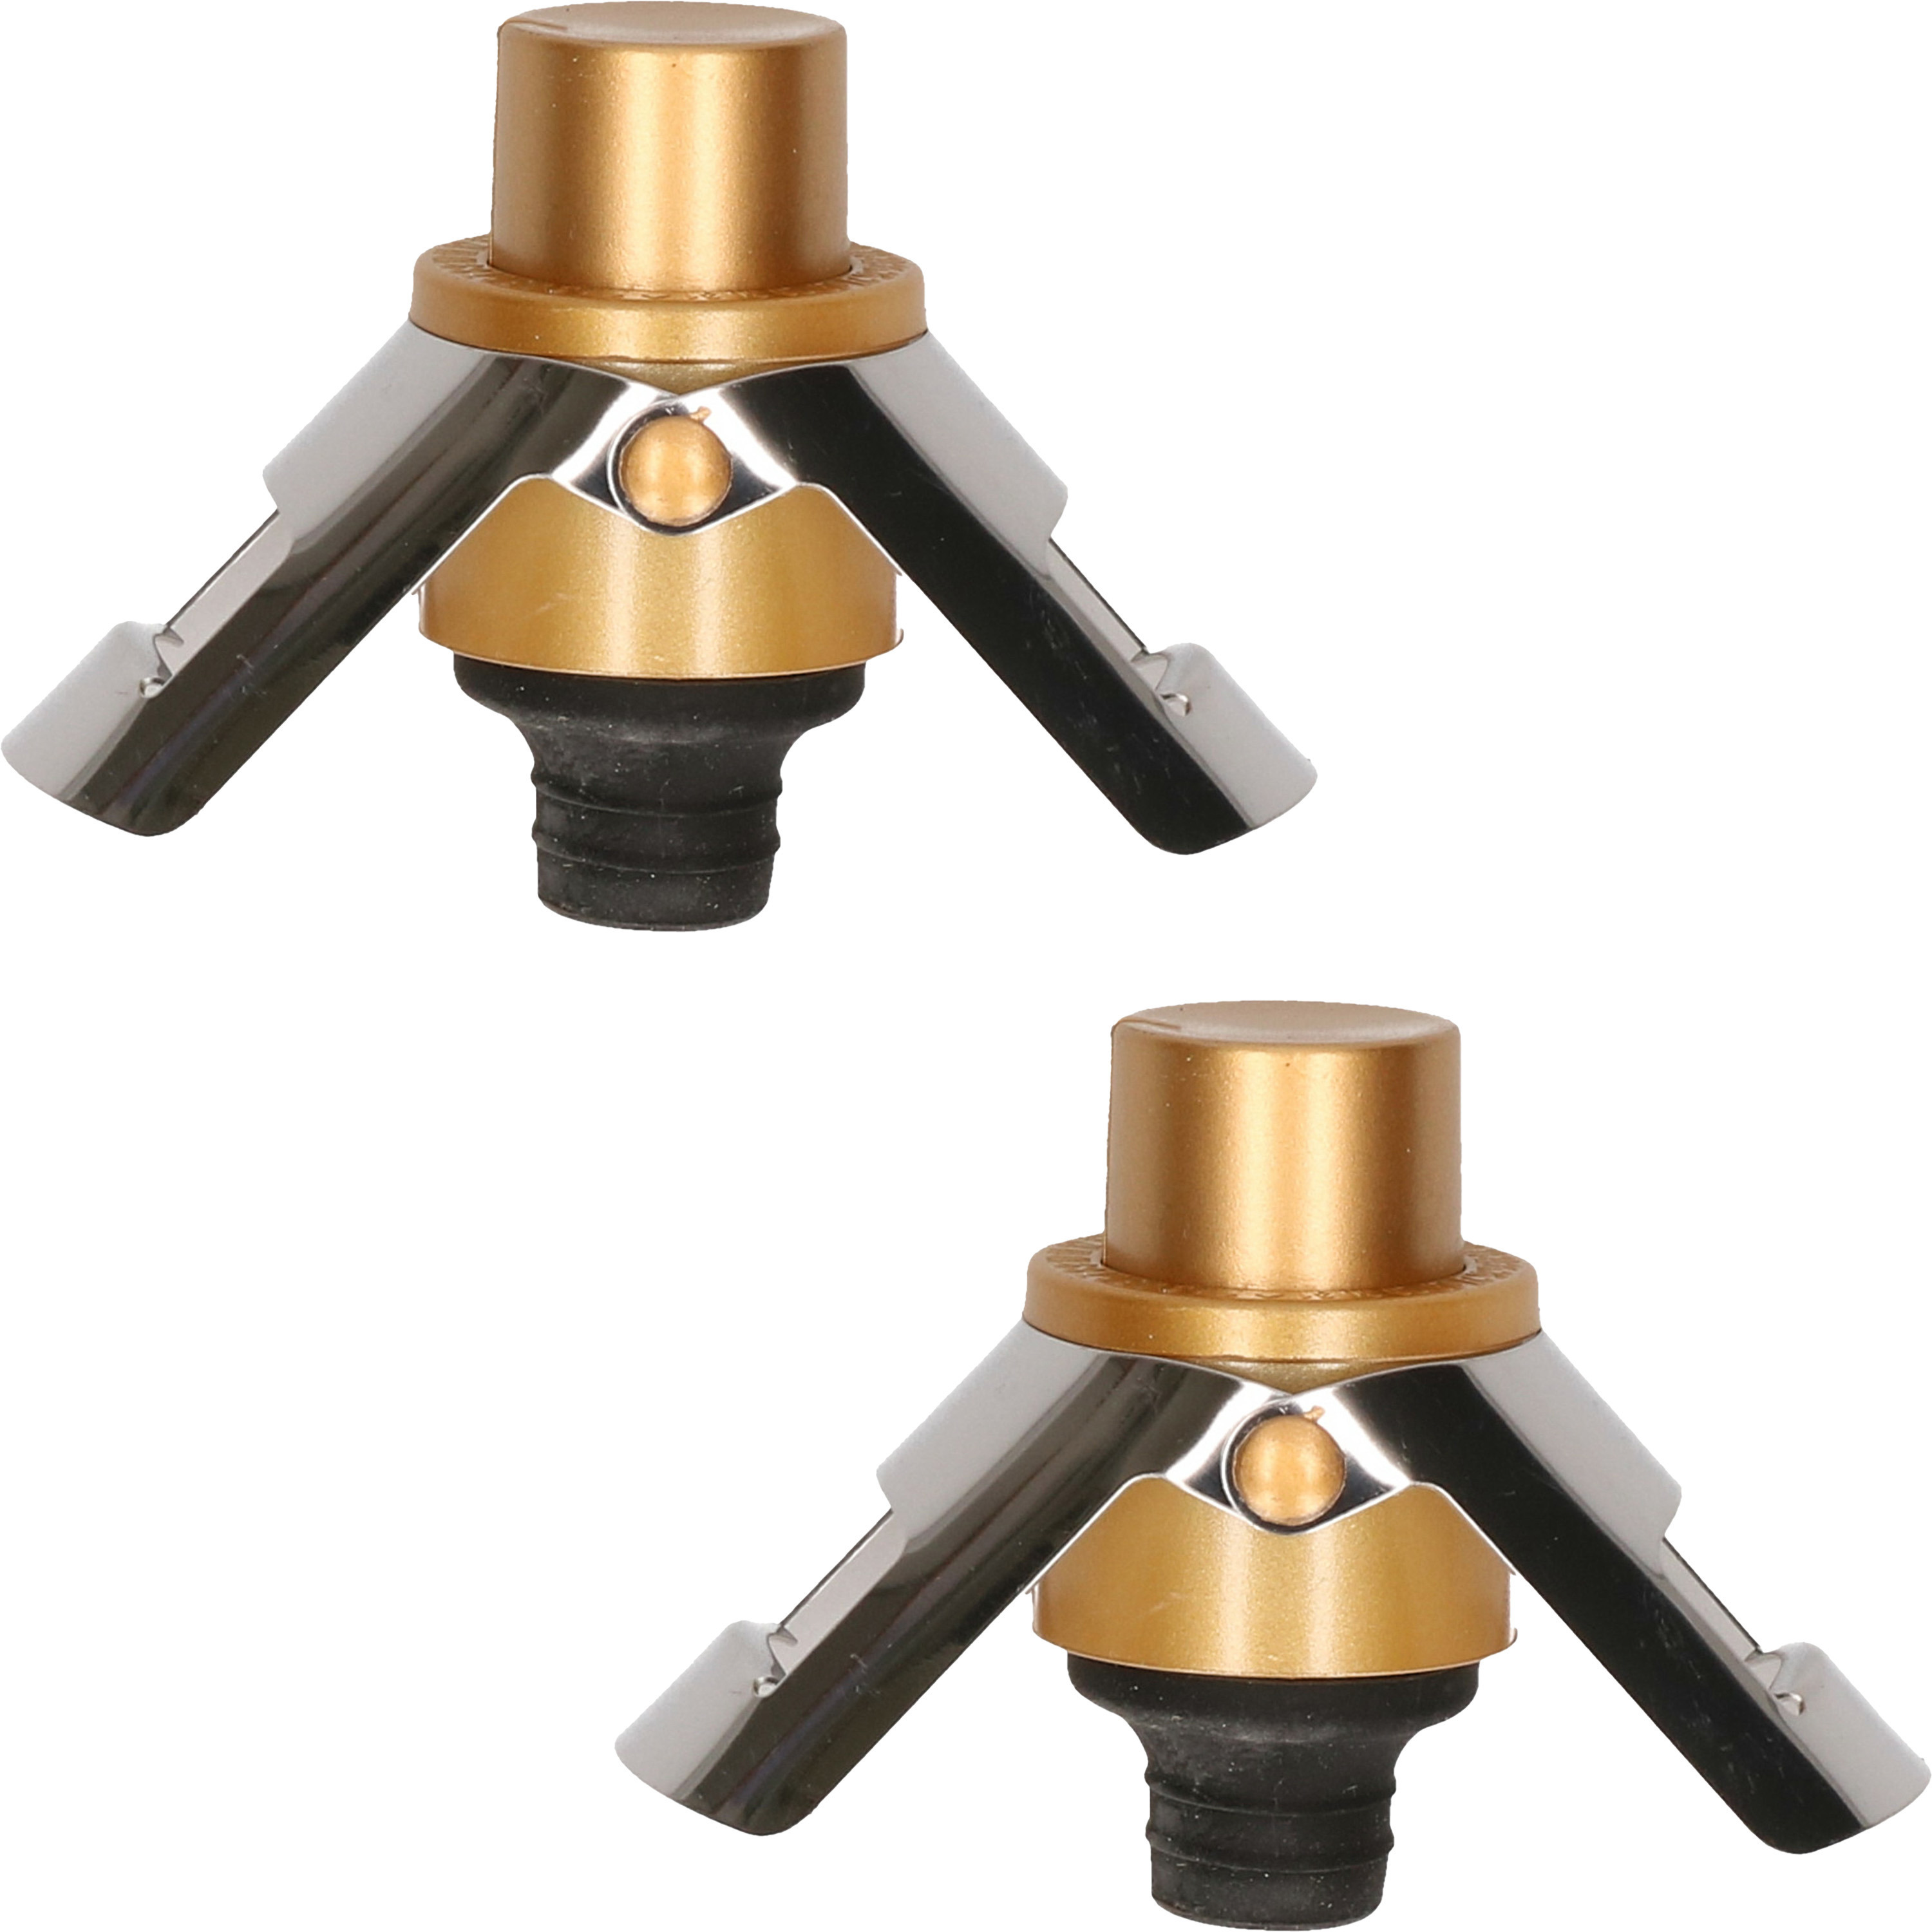 Champagnefles stopper-afsluiter 2x 4 x 4 x 4 cm Champagnedop RVS-Rubber